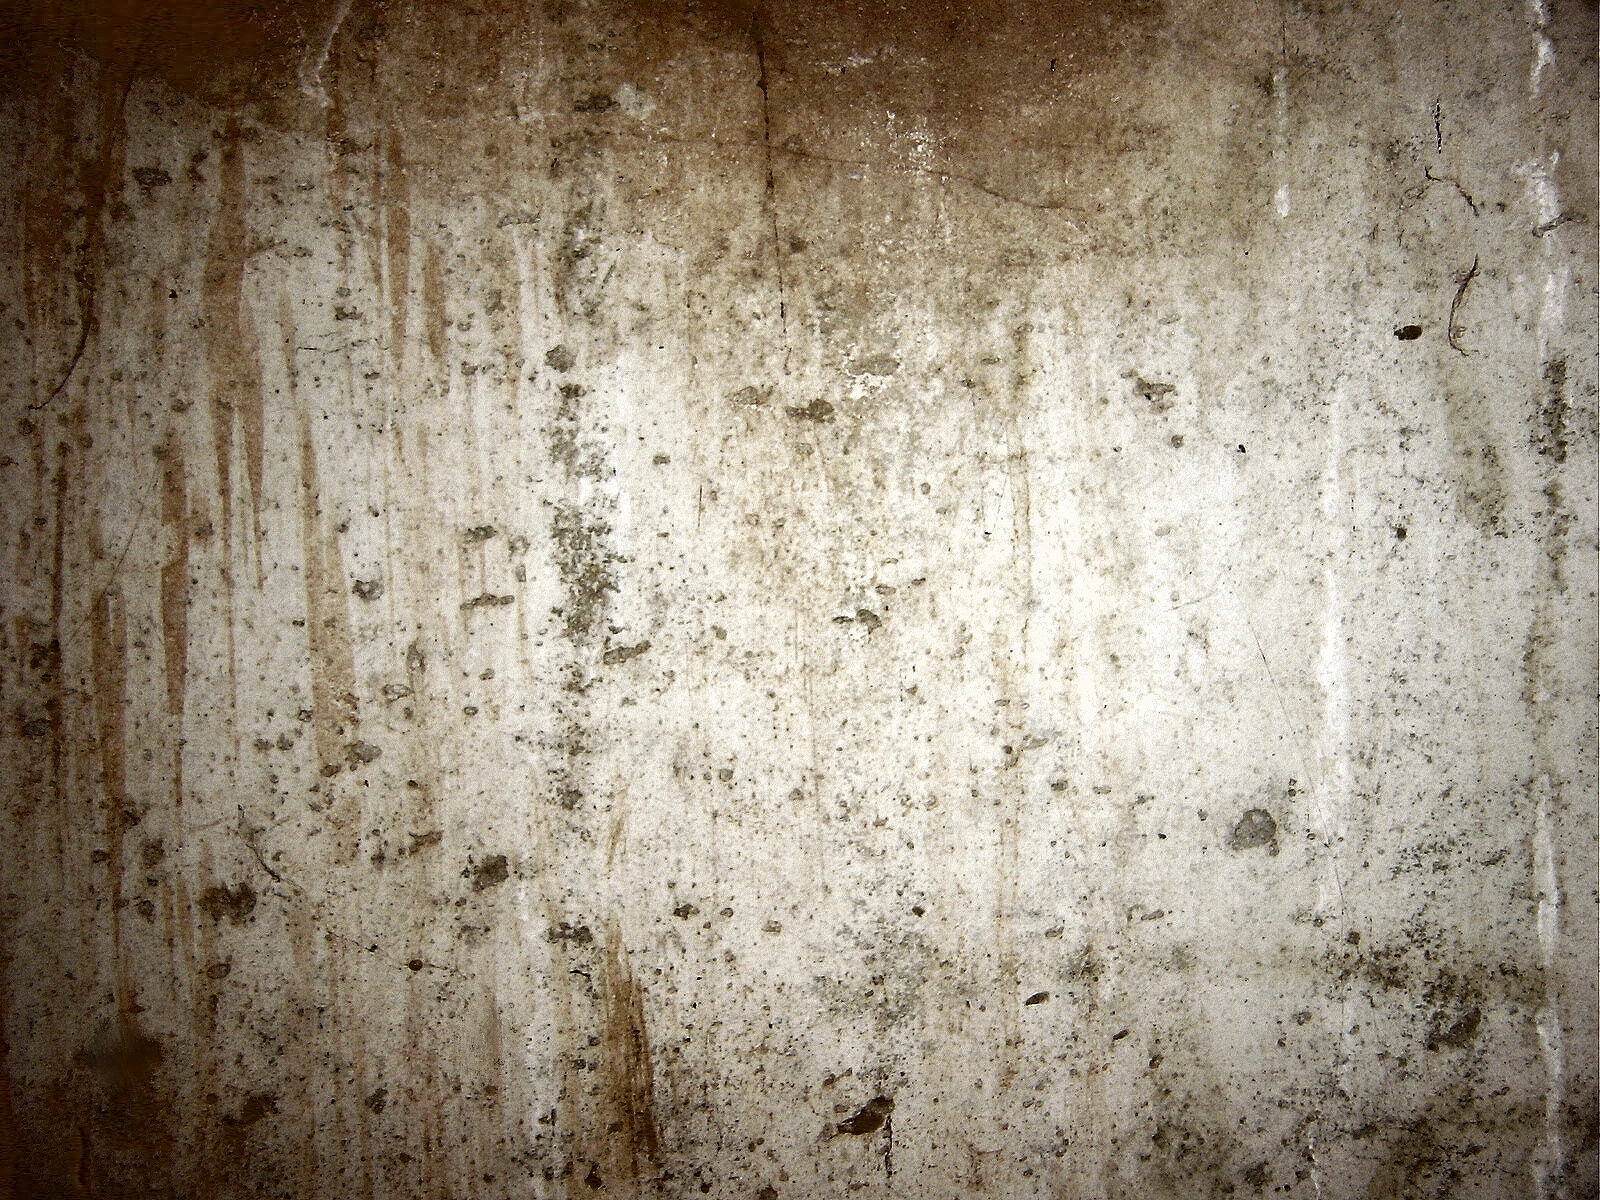 Concrete Basement Wall Texture By Fantasystock